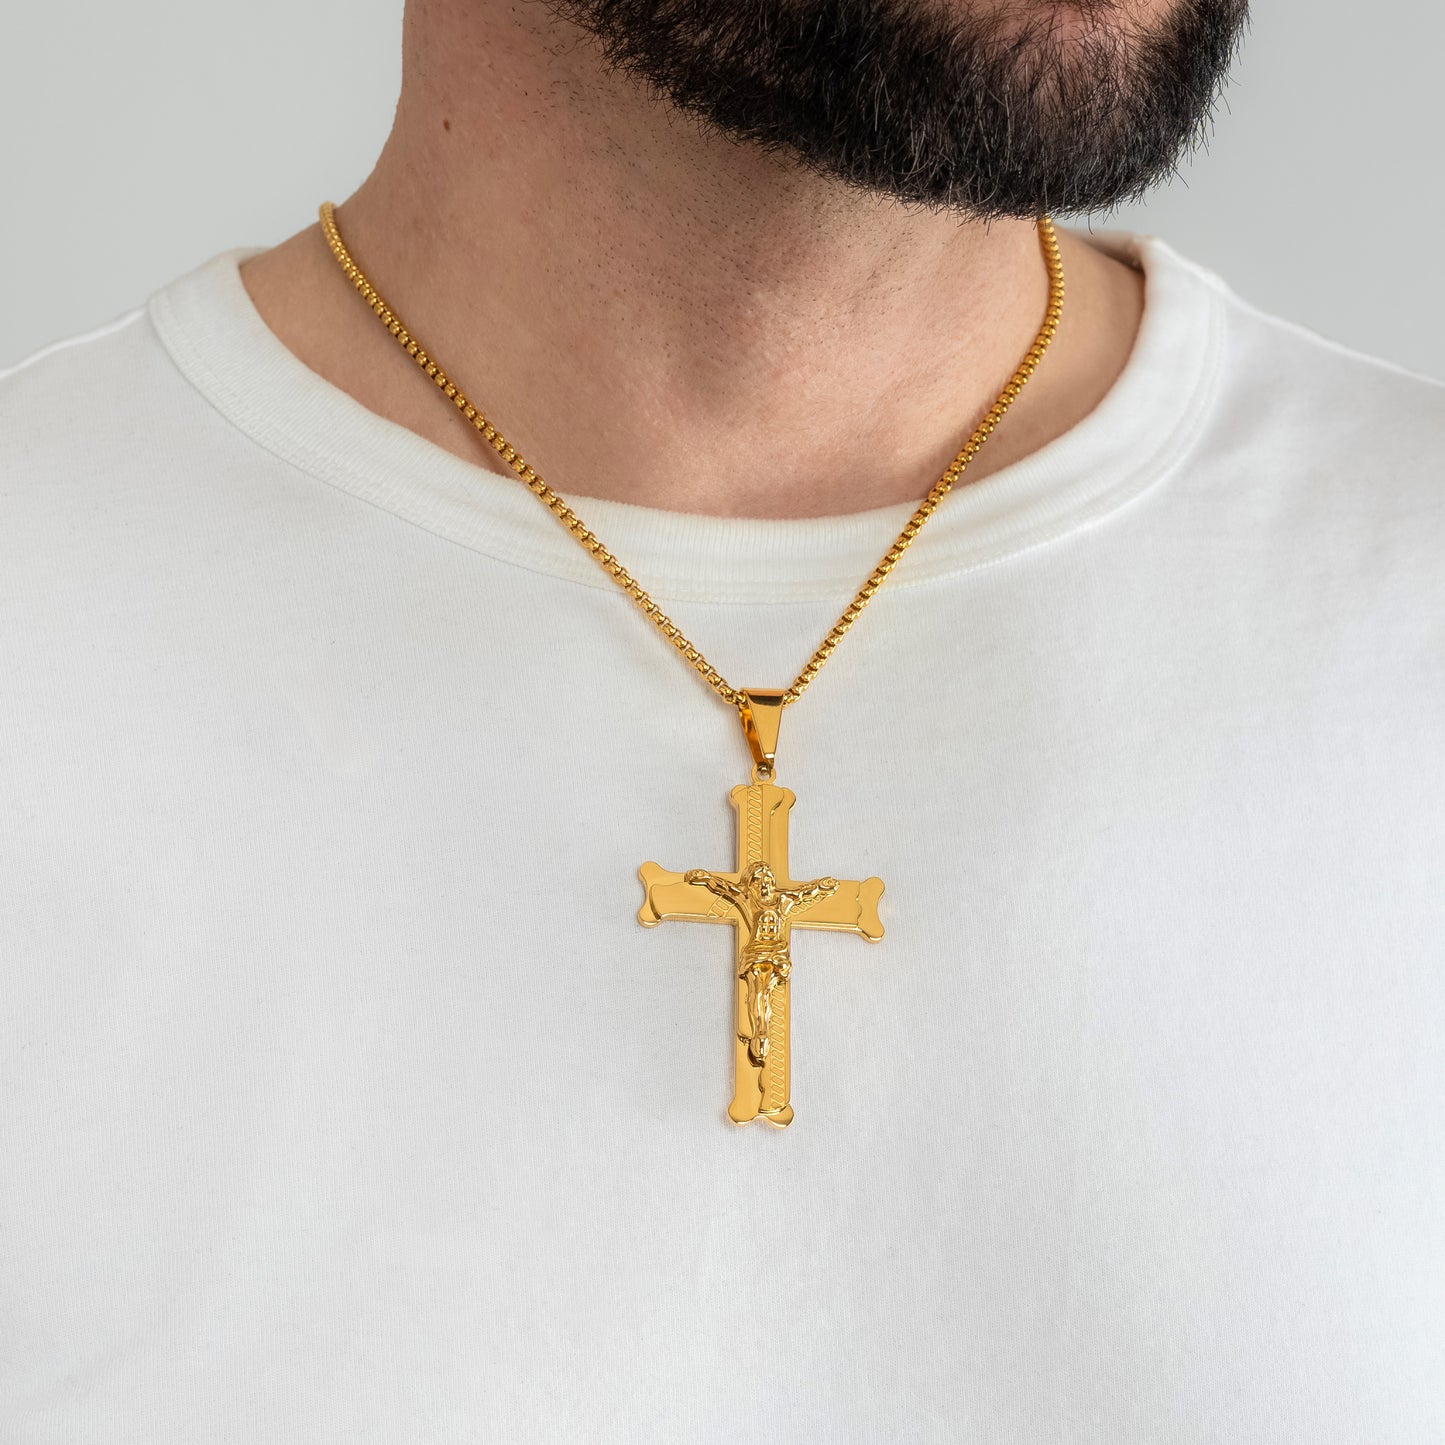 A male model in a white t-shirt wearing a Bliss Crucifix Cross Gold Pendant with a 3mm Gold Rope chain 22 inches. Close-up image of the non-tarnish, waterproof trending religious men's necklace.